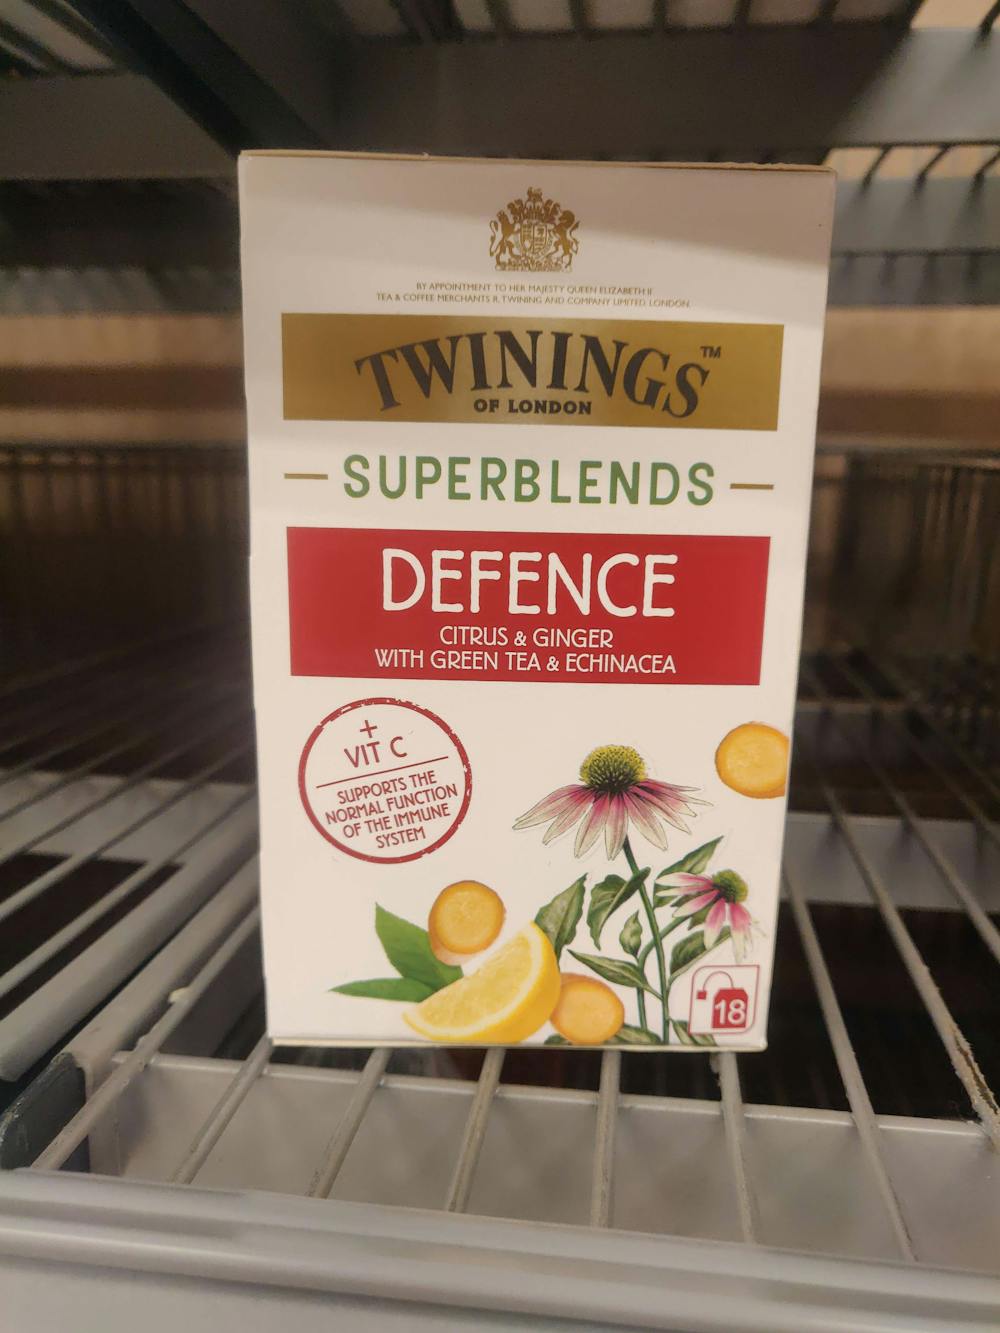 Superblends defence , Twinings